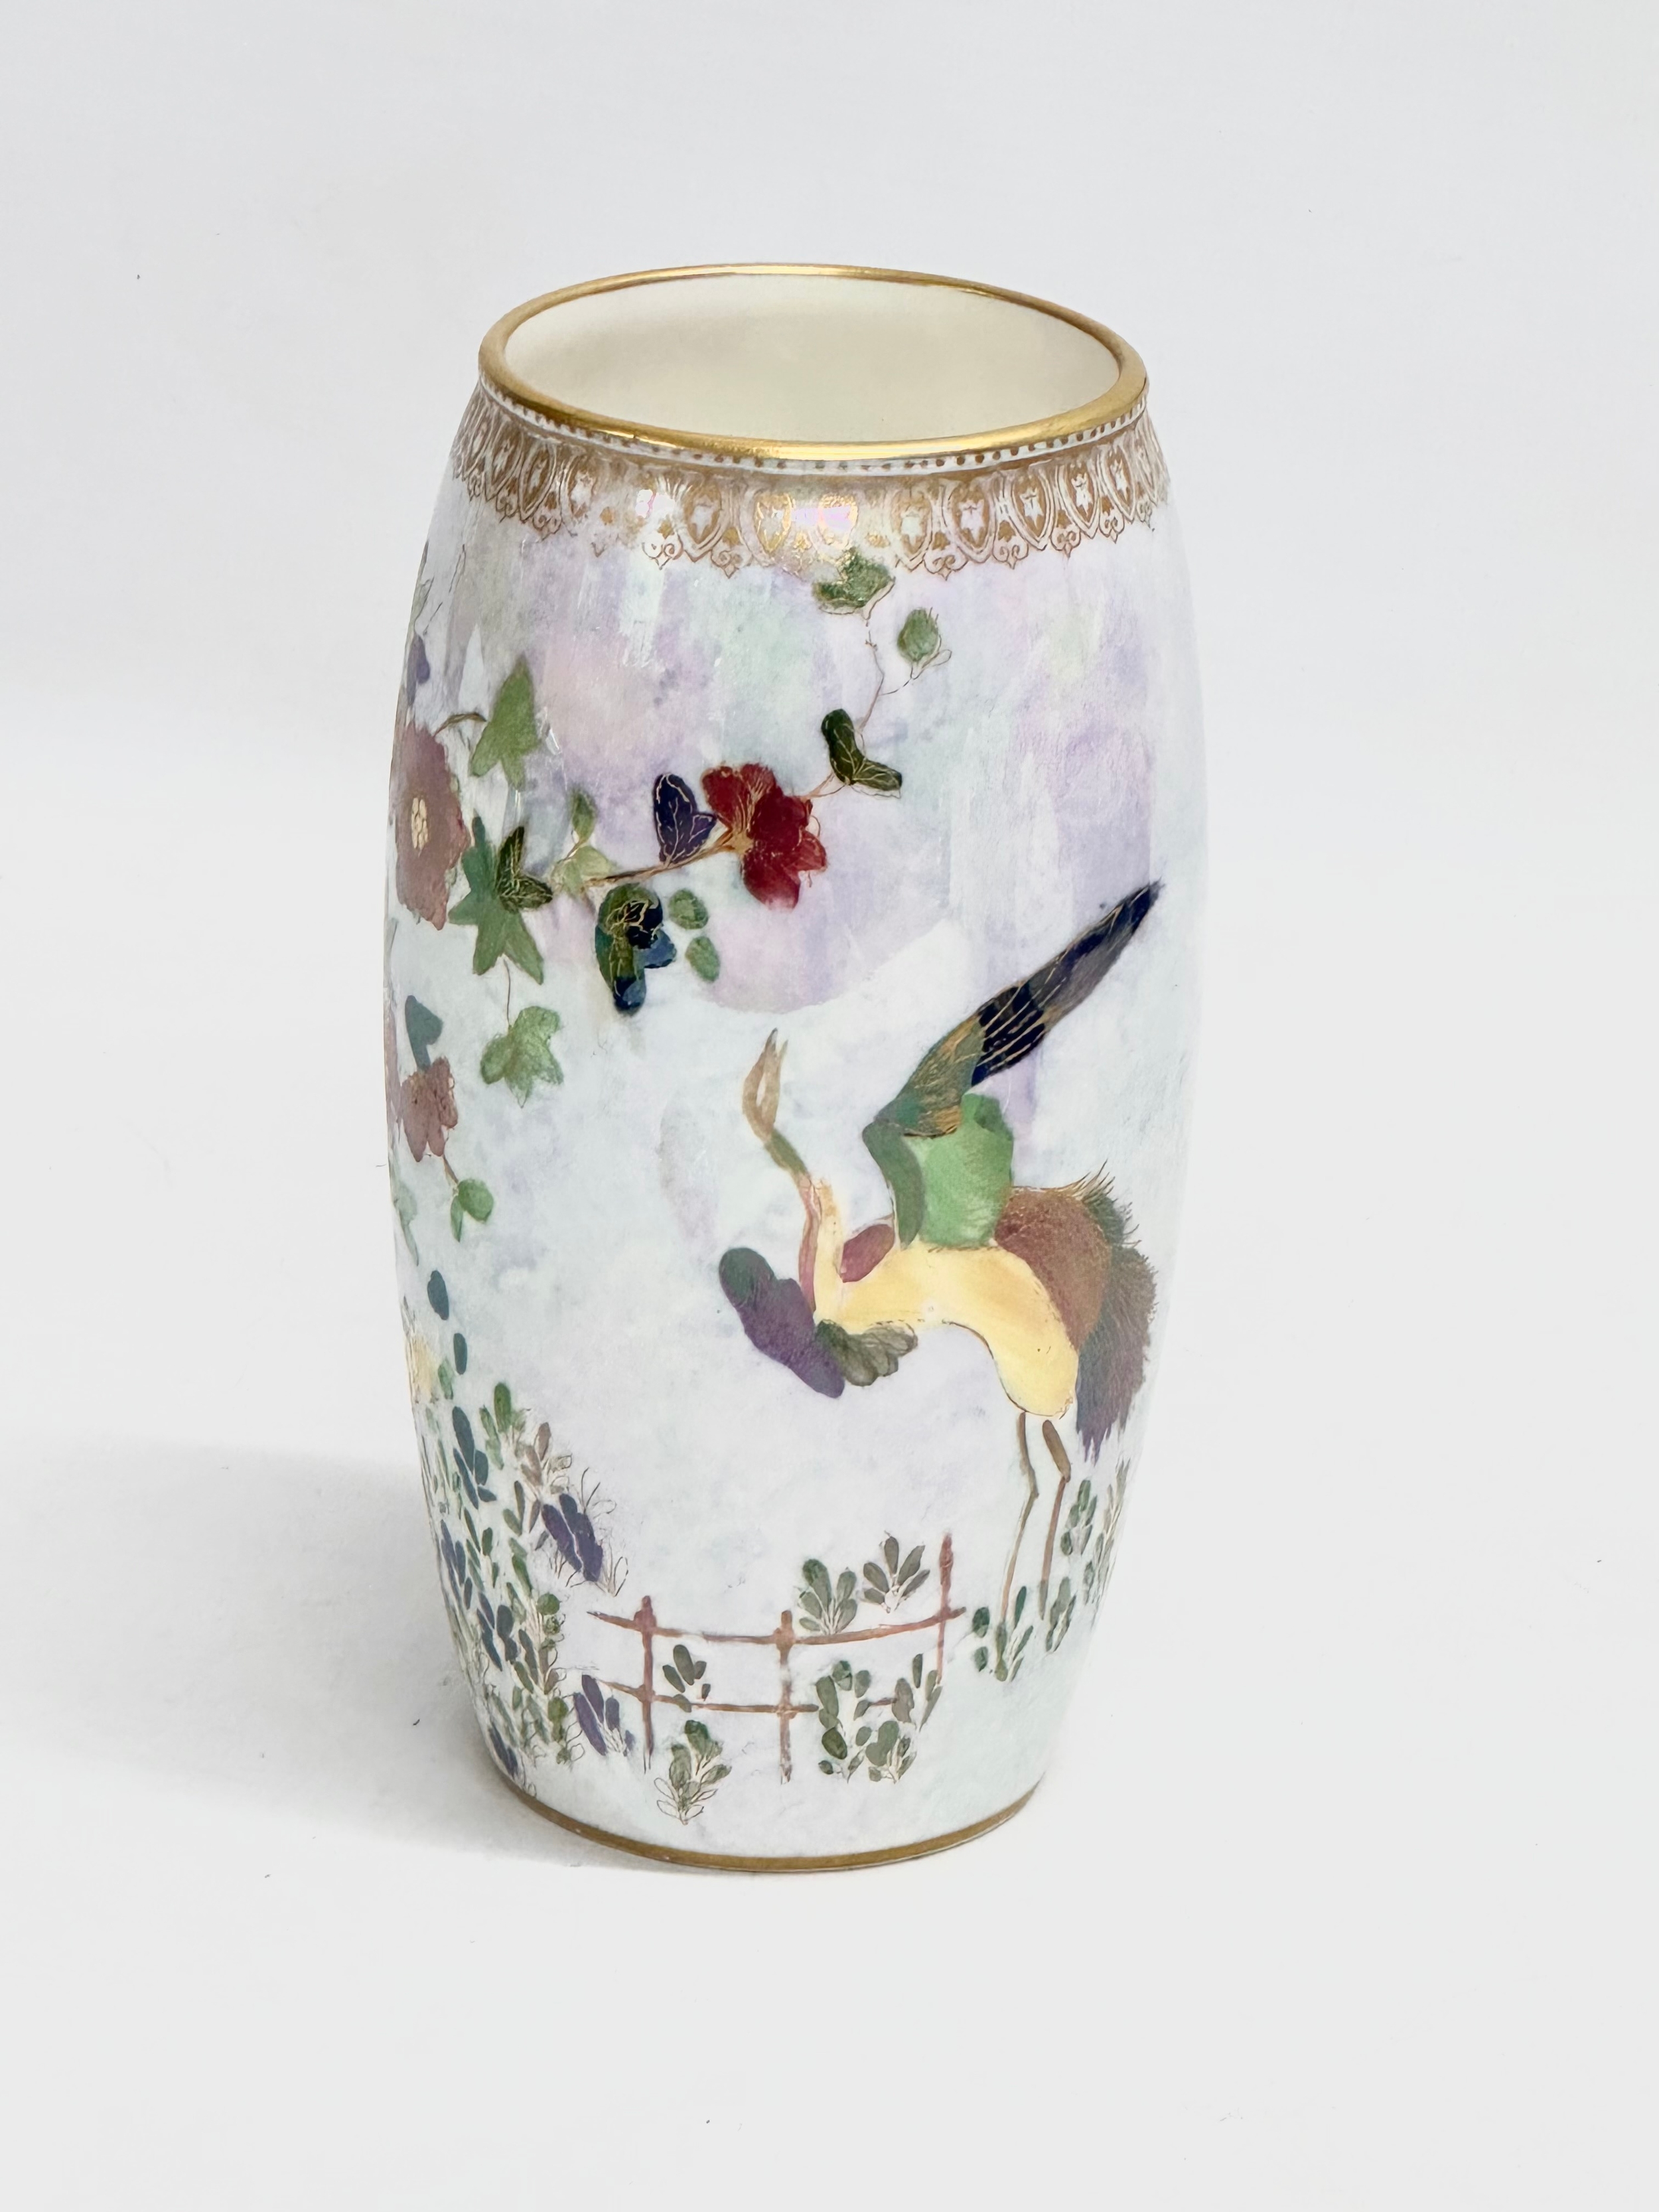 A Royal Doulton lustre vase designed by Herbert Betteley. Early 20th century. 1922-1927. 18cm - Image 6 of 8